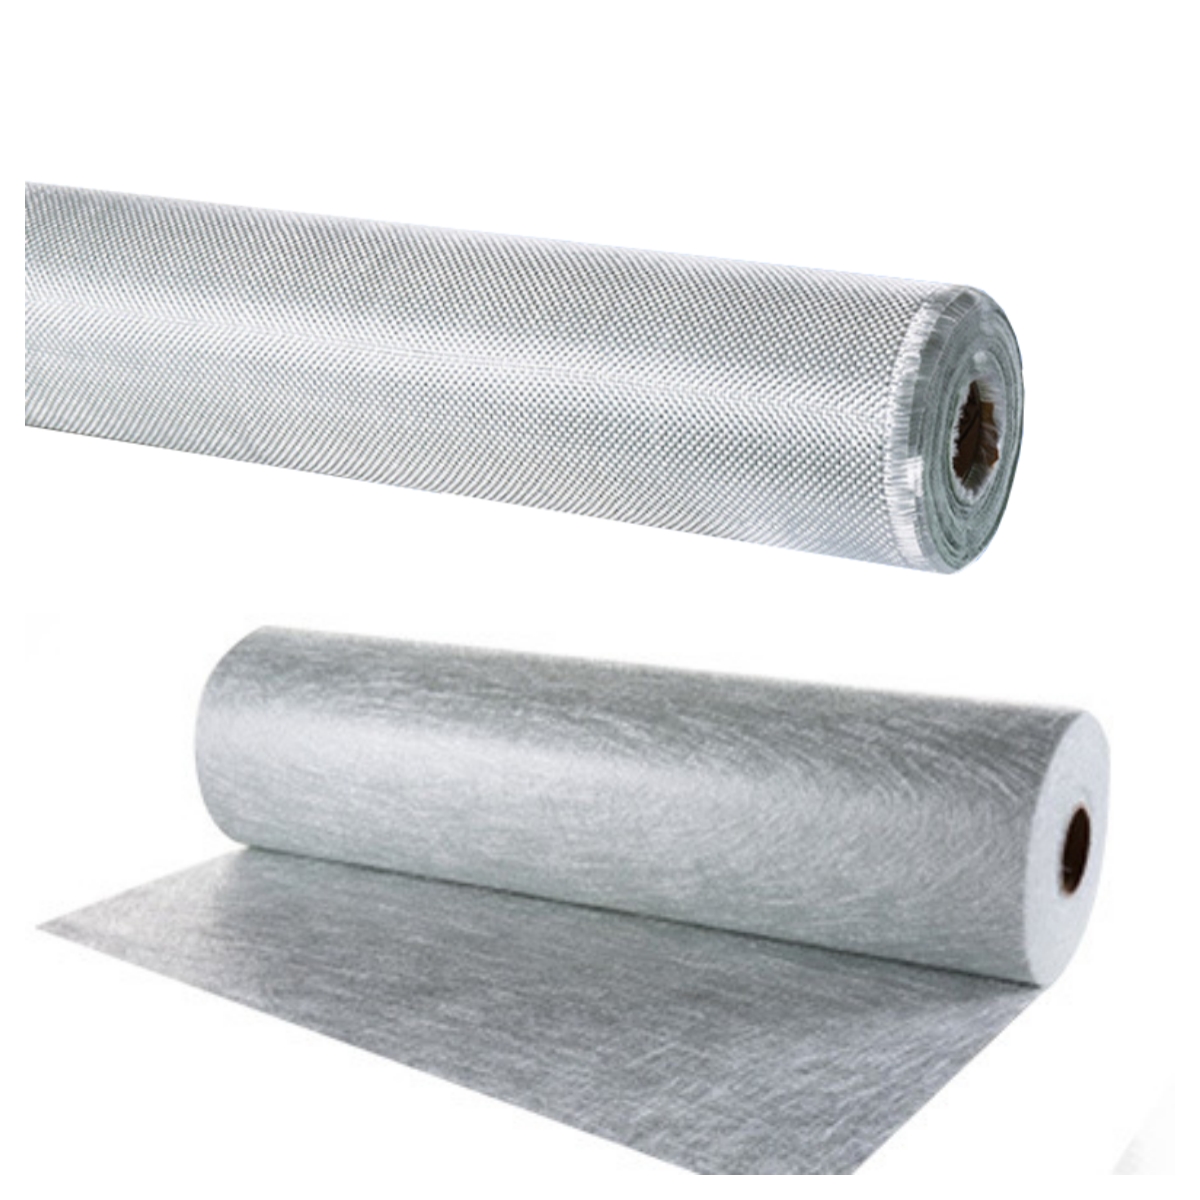 What is the difference between fiberglass cloth and fiberglass mat?